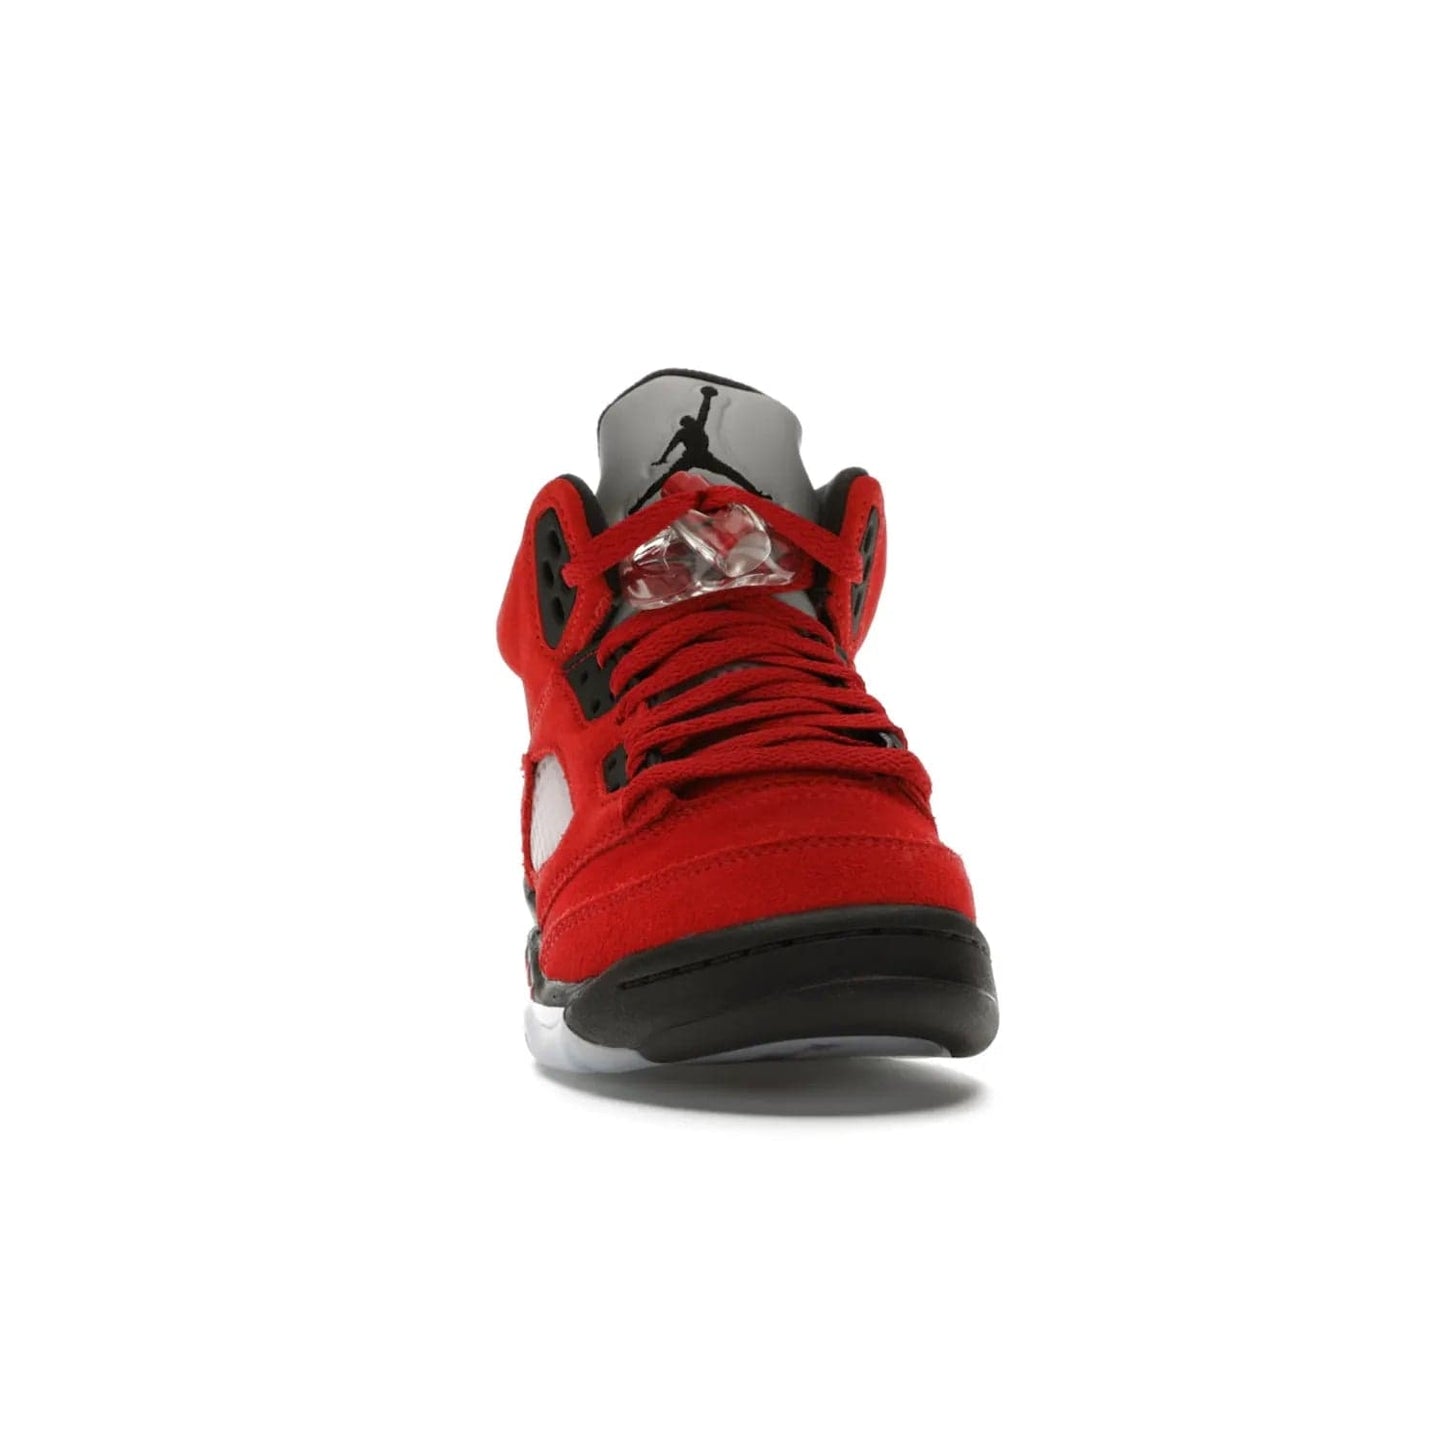 Jordan 5 Retro Raging Bull Red (2021) (GS) - Image 9 - Only at www.BallersClubKickz.com - Jordan 5 Retro Raging Bulls Red 2021 GS. Varsity Red suede upper with embroidered number 23, black leather detail, red laces, and midsole with air cushioning. Jumpman logos on tongue, heel, and outsole. On-trend streetwear and basketball style. Released April 10, 2021.